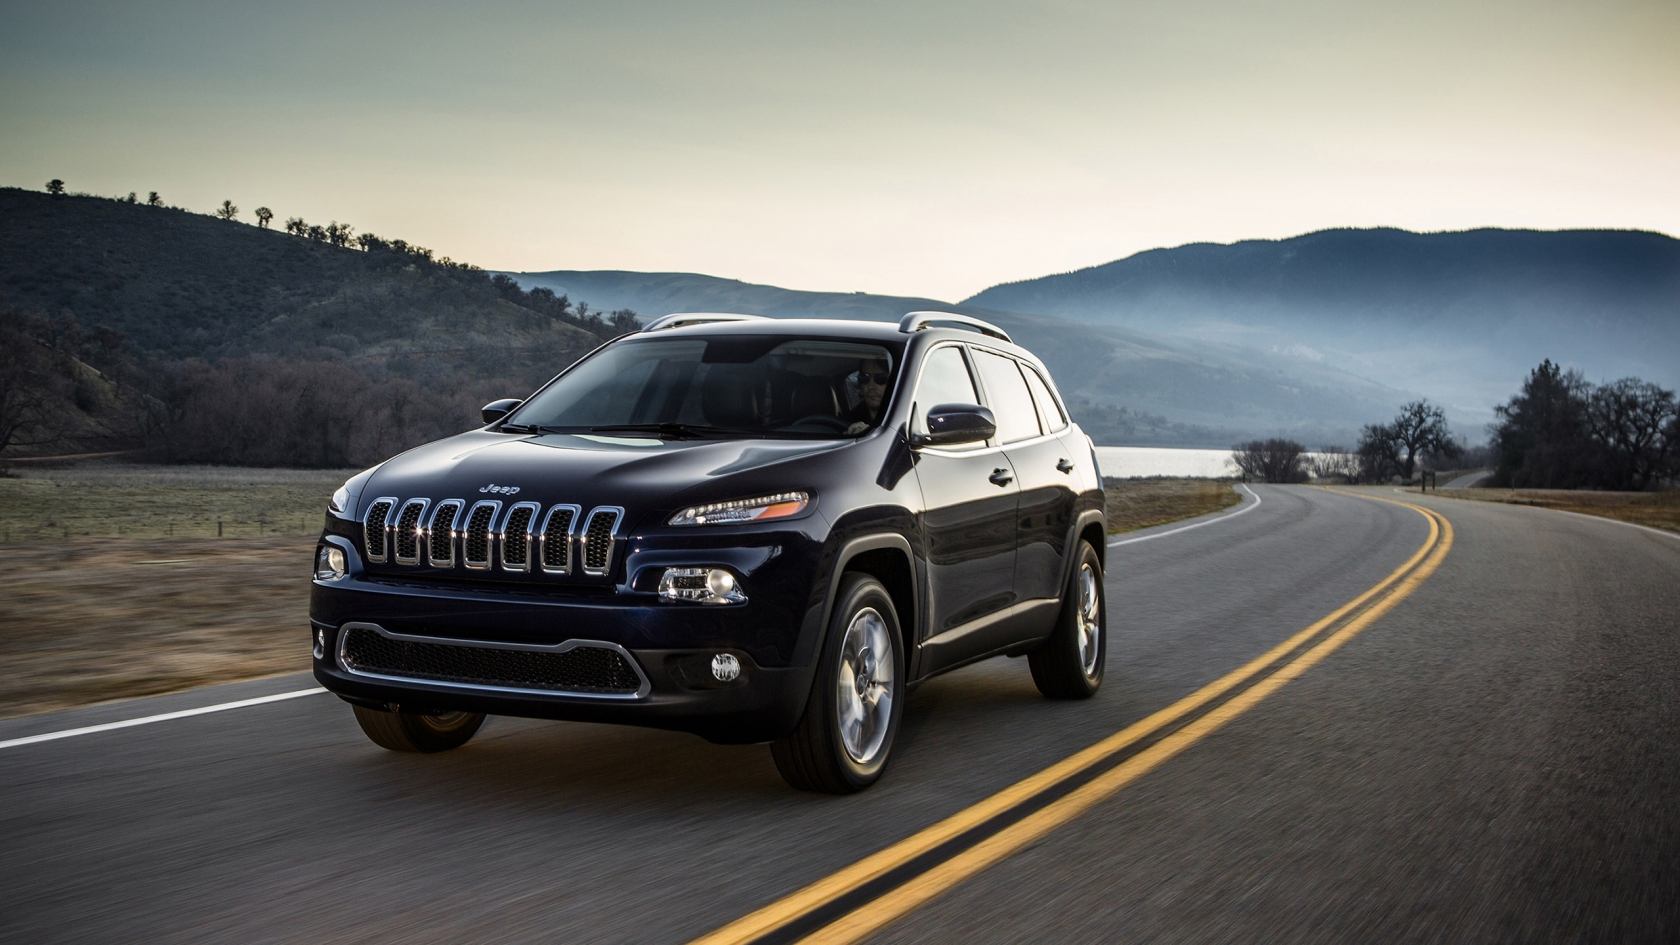 Jeep Cherokee 2014 Edition for 1680 x 945 HDTV resolution